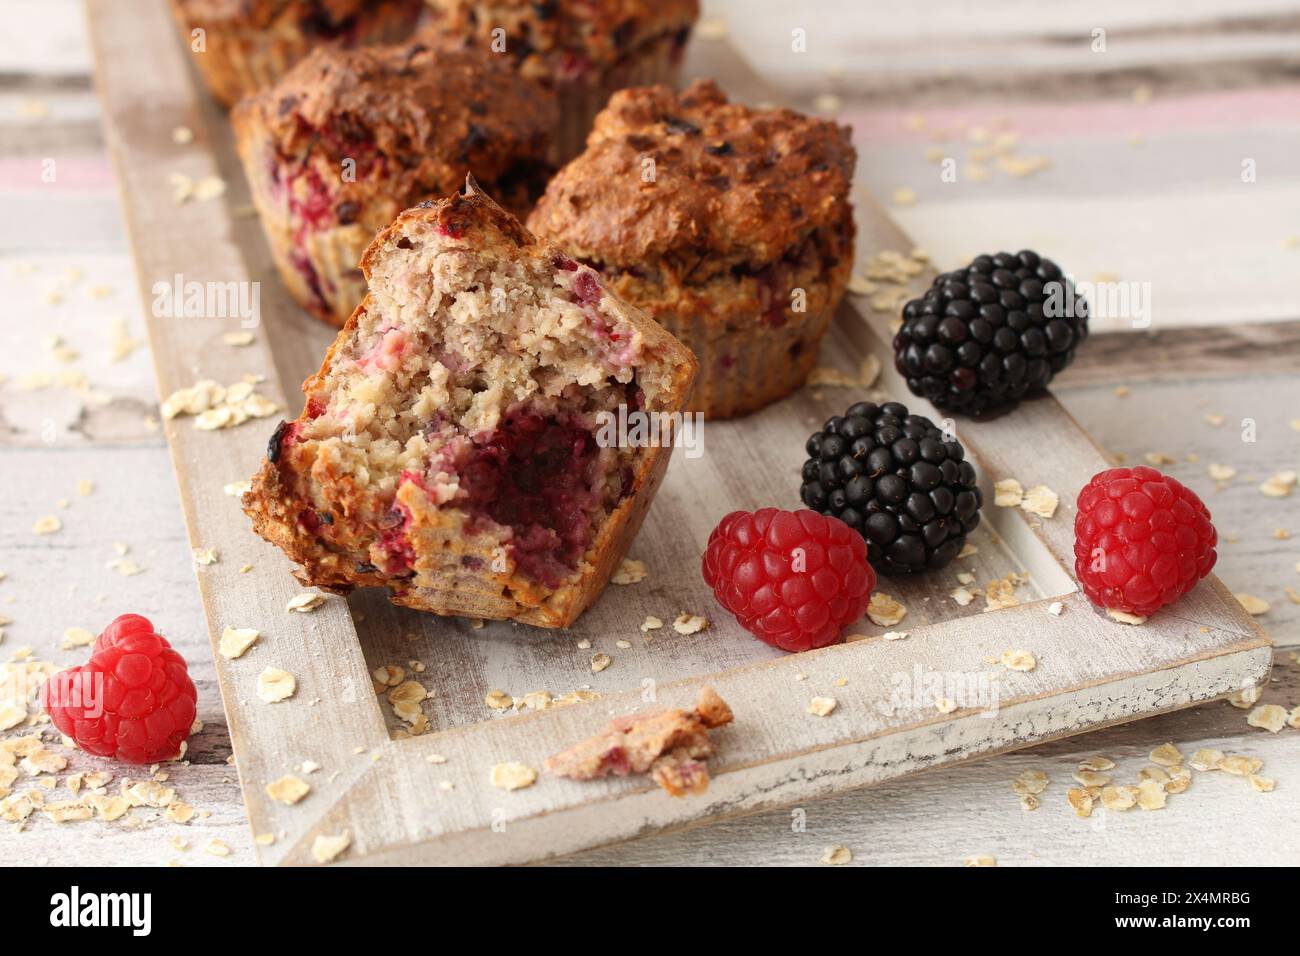 Sugar-Free Baked Oat Breakfast Muffins with Berries Stock Photo